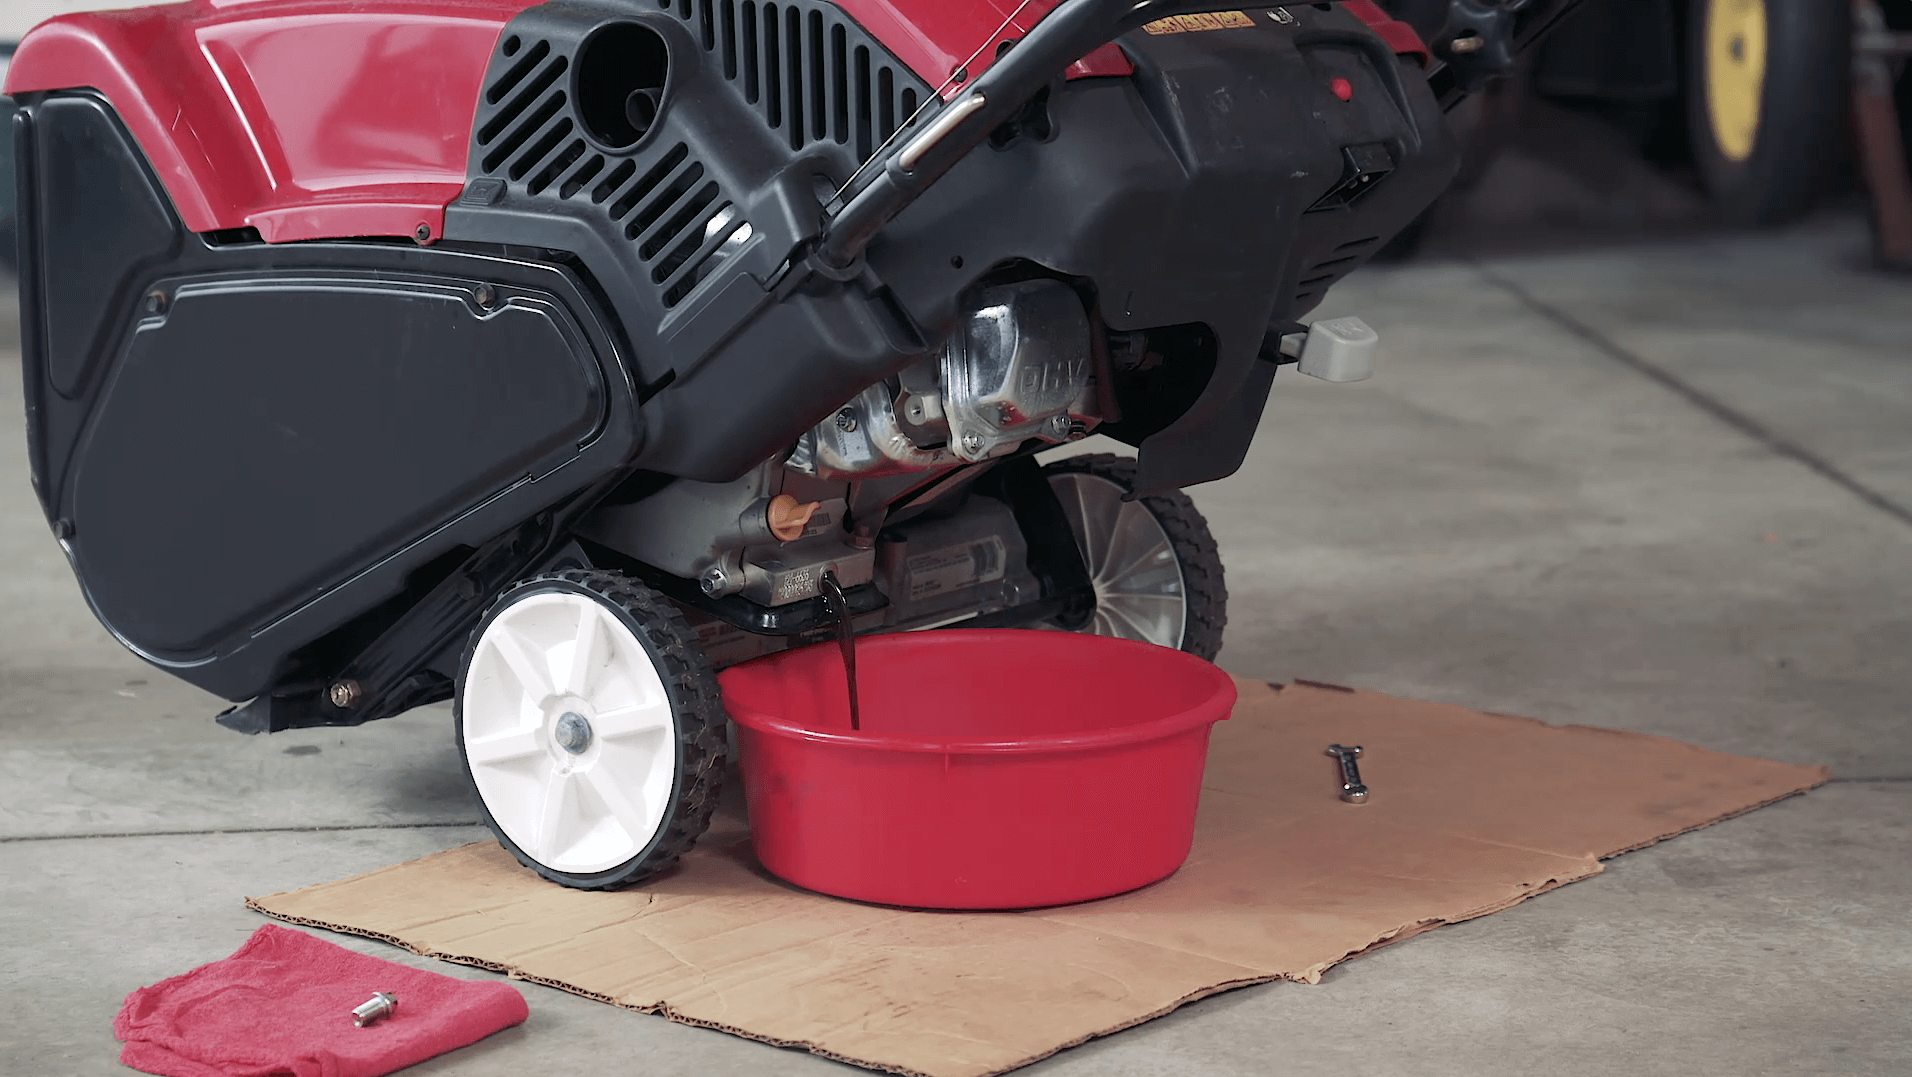 Draining oil from Toro engine into red bucket in garage